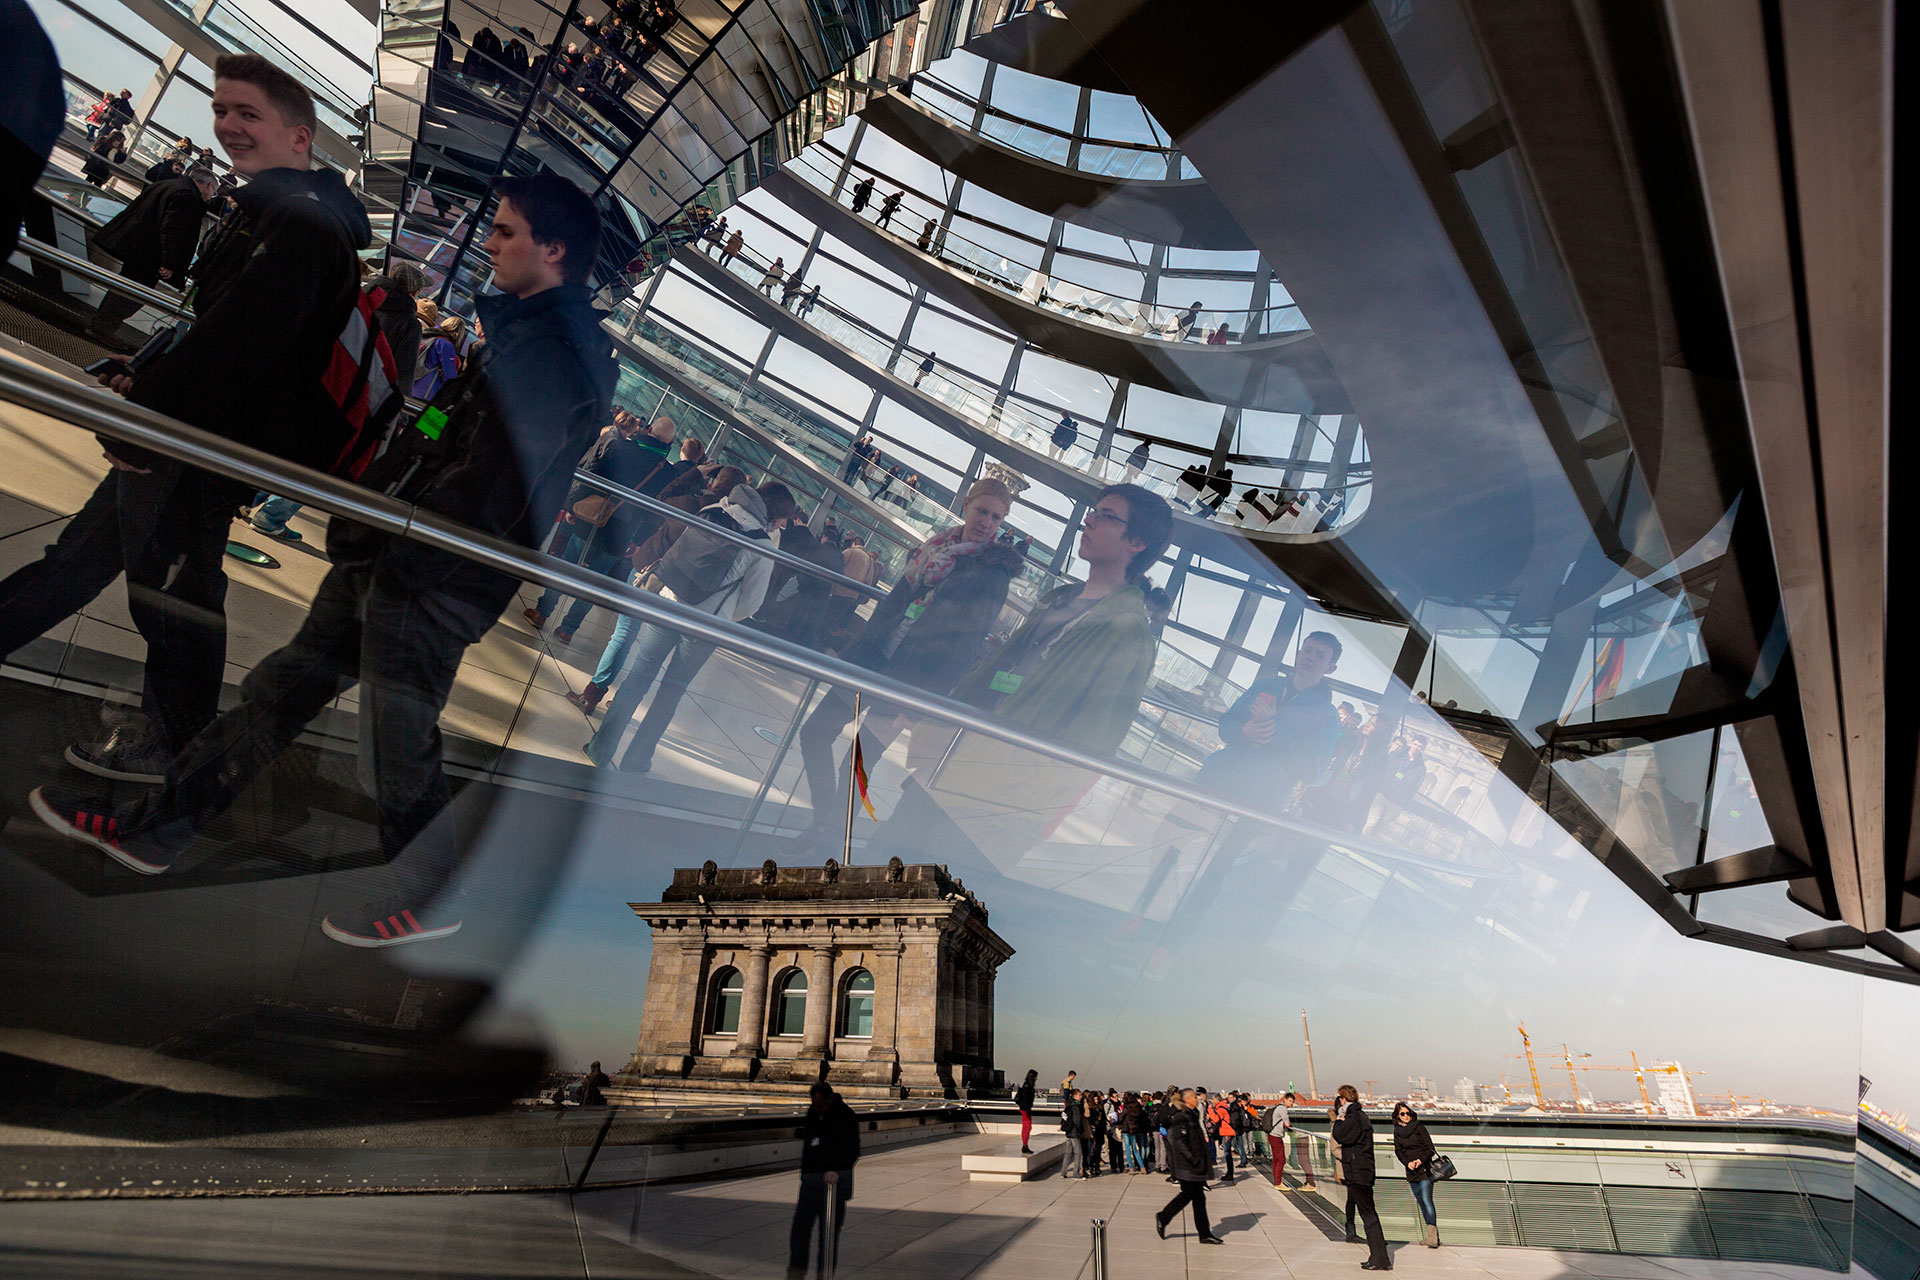  In the 1990s, British architect Norman Foster restored Germany’s 1984 parliament building, the Reichstag, damaged in World War II. He added a central glass dome to symbolize transparency.  Berlin, Germany.  